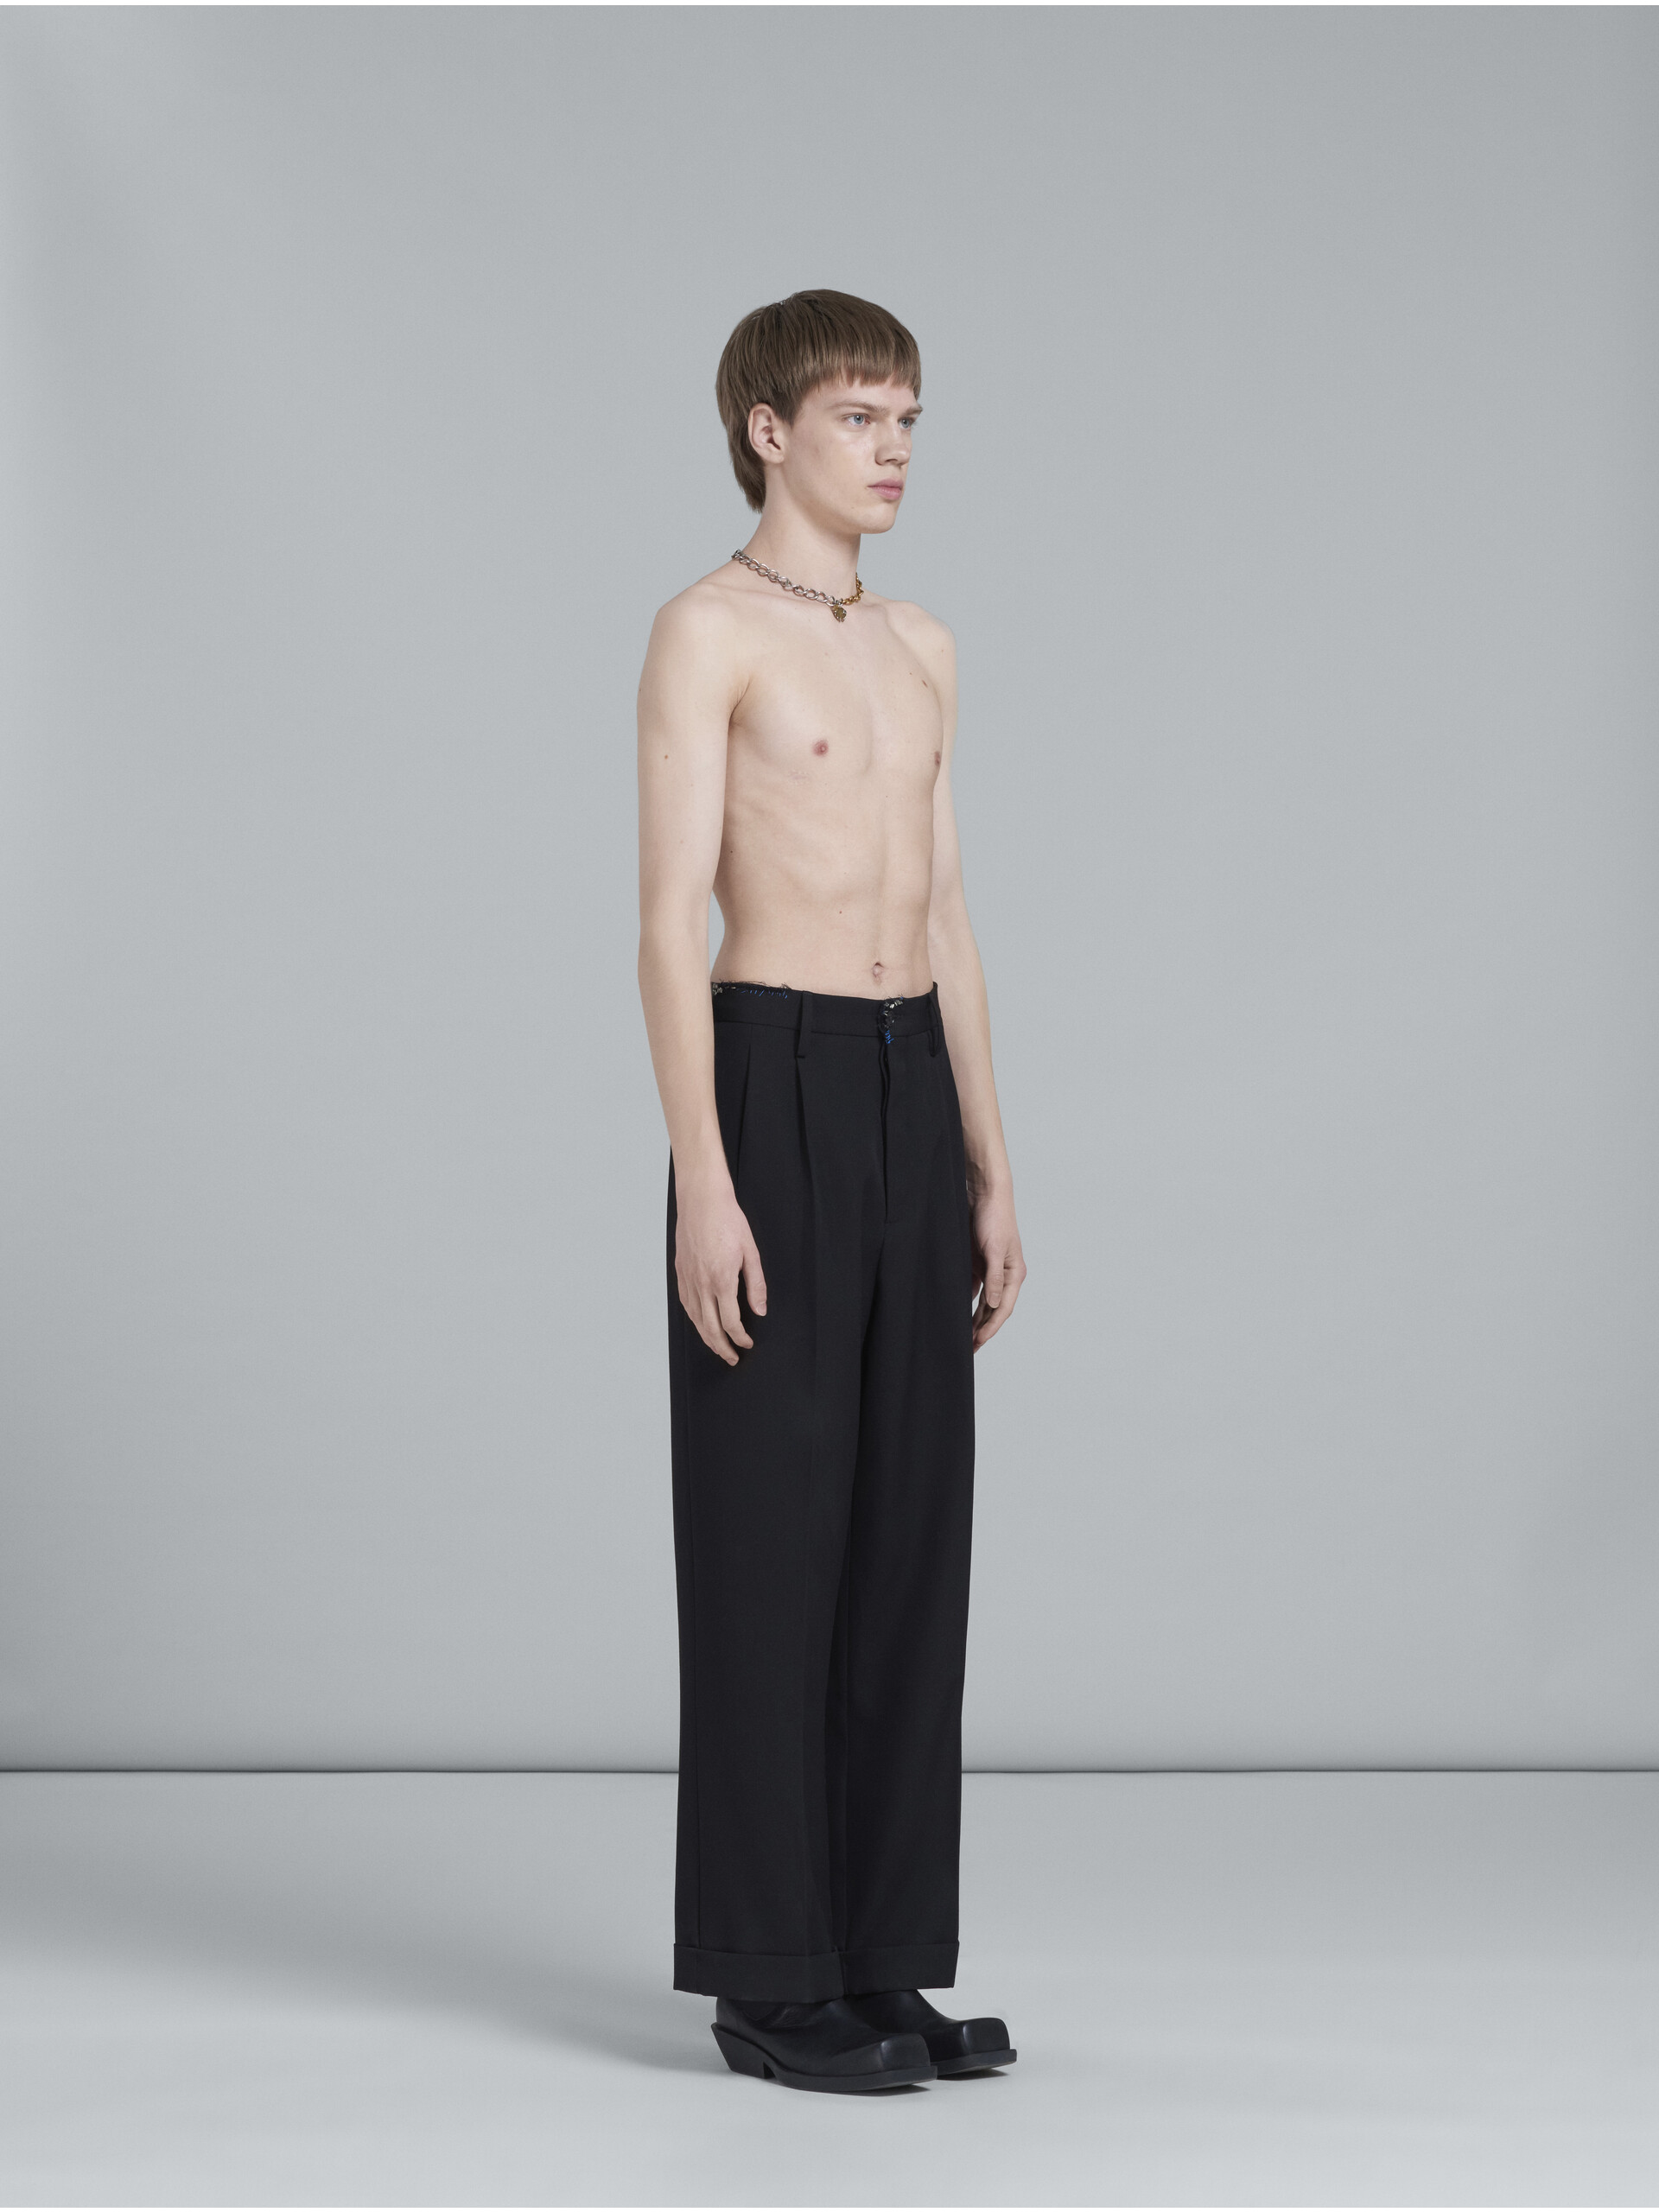 Black tuxedo-style pants with embroidery - Pants - Image 5